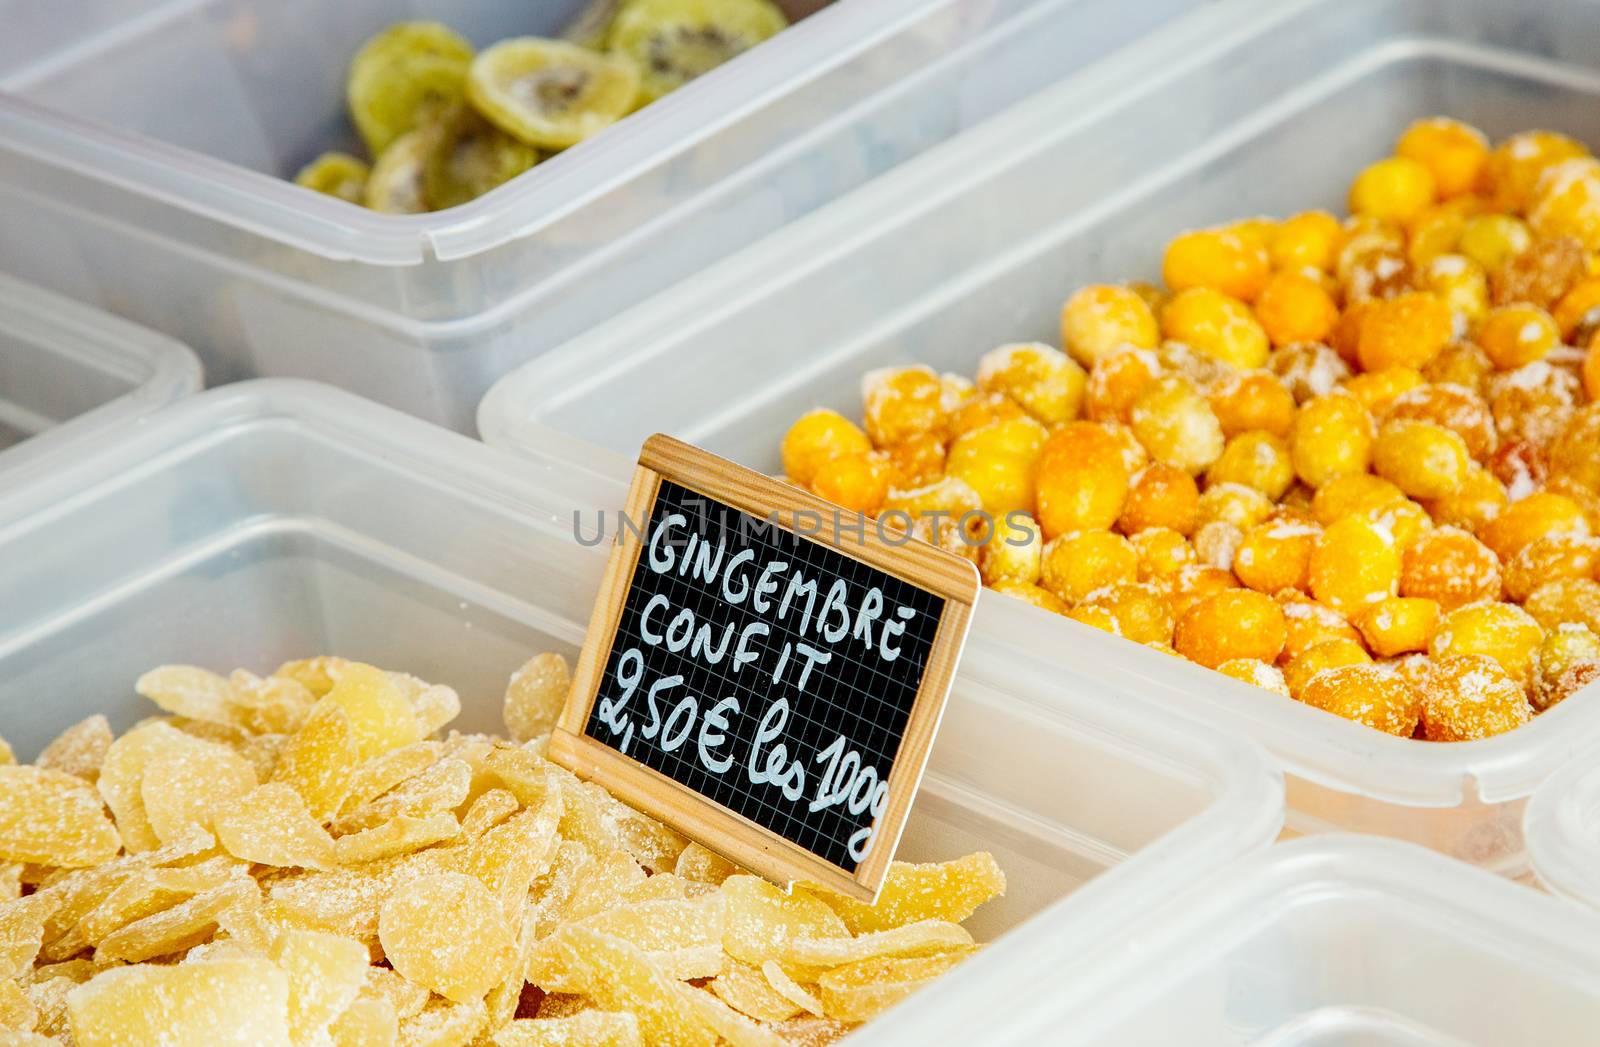 Candied ginger ("gingembre confit" in French) at the food market